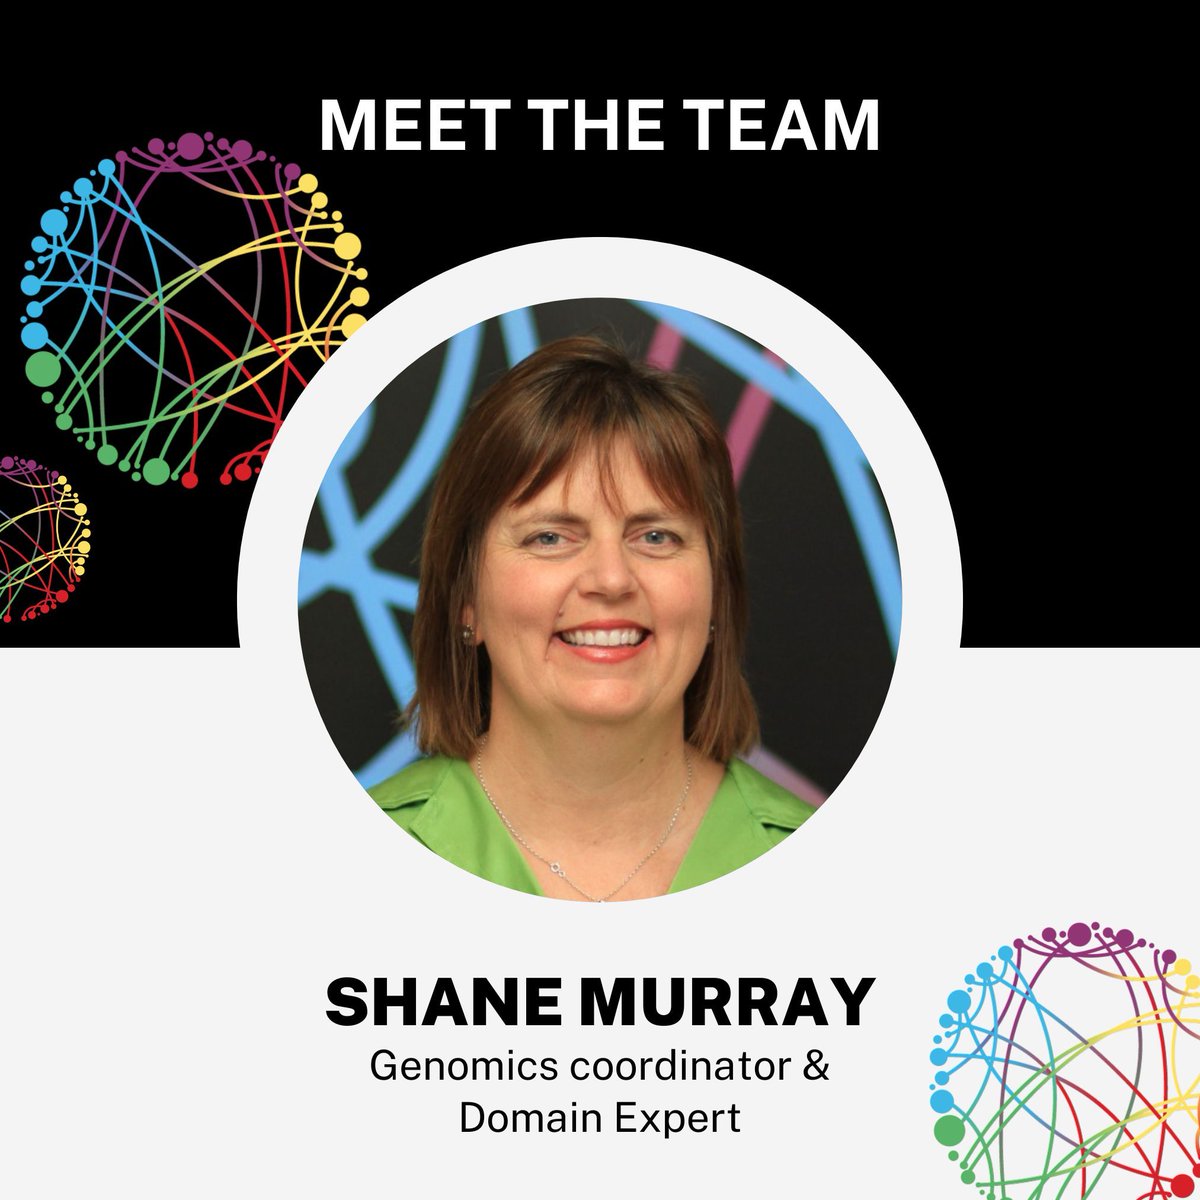 Shane Murray @smurrayza is on a quest for genomics knowledge. Got questions? She's got answers. Join the conversation! #Genomics #AskTheExpert #womeninstem